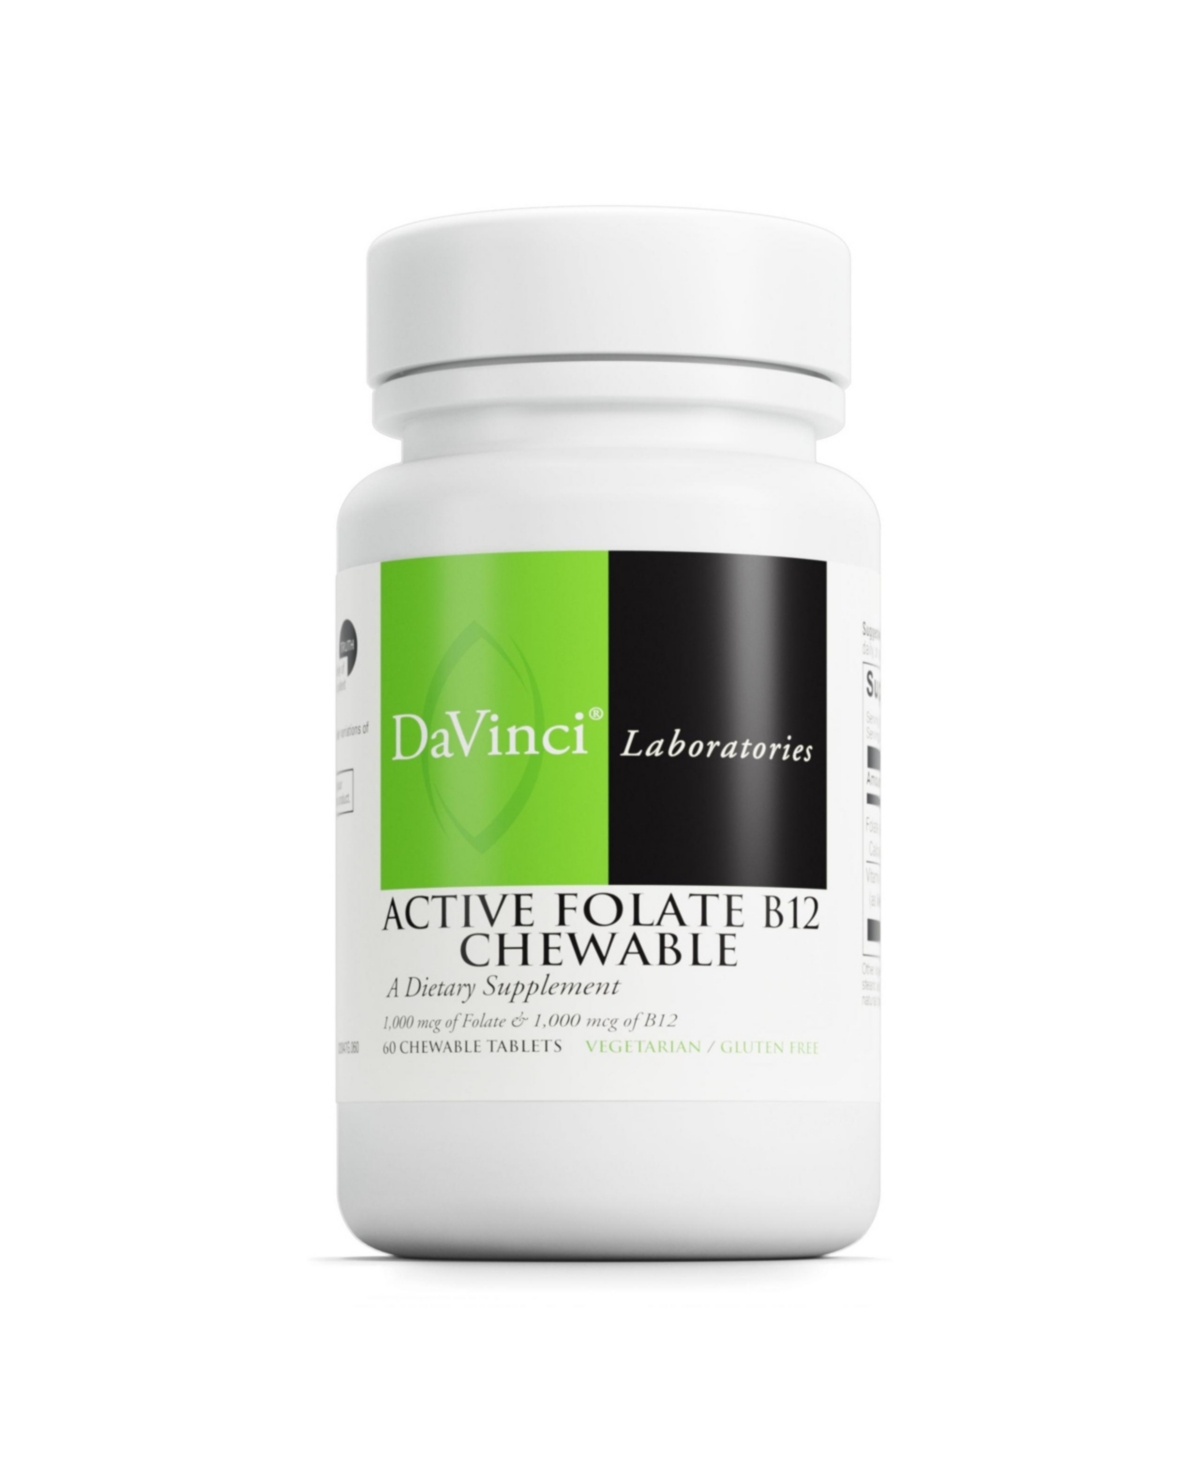 DaVinci Labs Active Folate B12 Chewable - Dietary Supplement to Support Heart Health, Healthy Nerves, Immune Function and Energy Production - With Fol